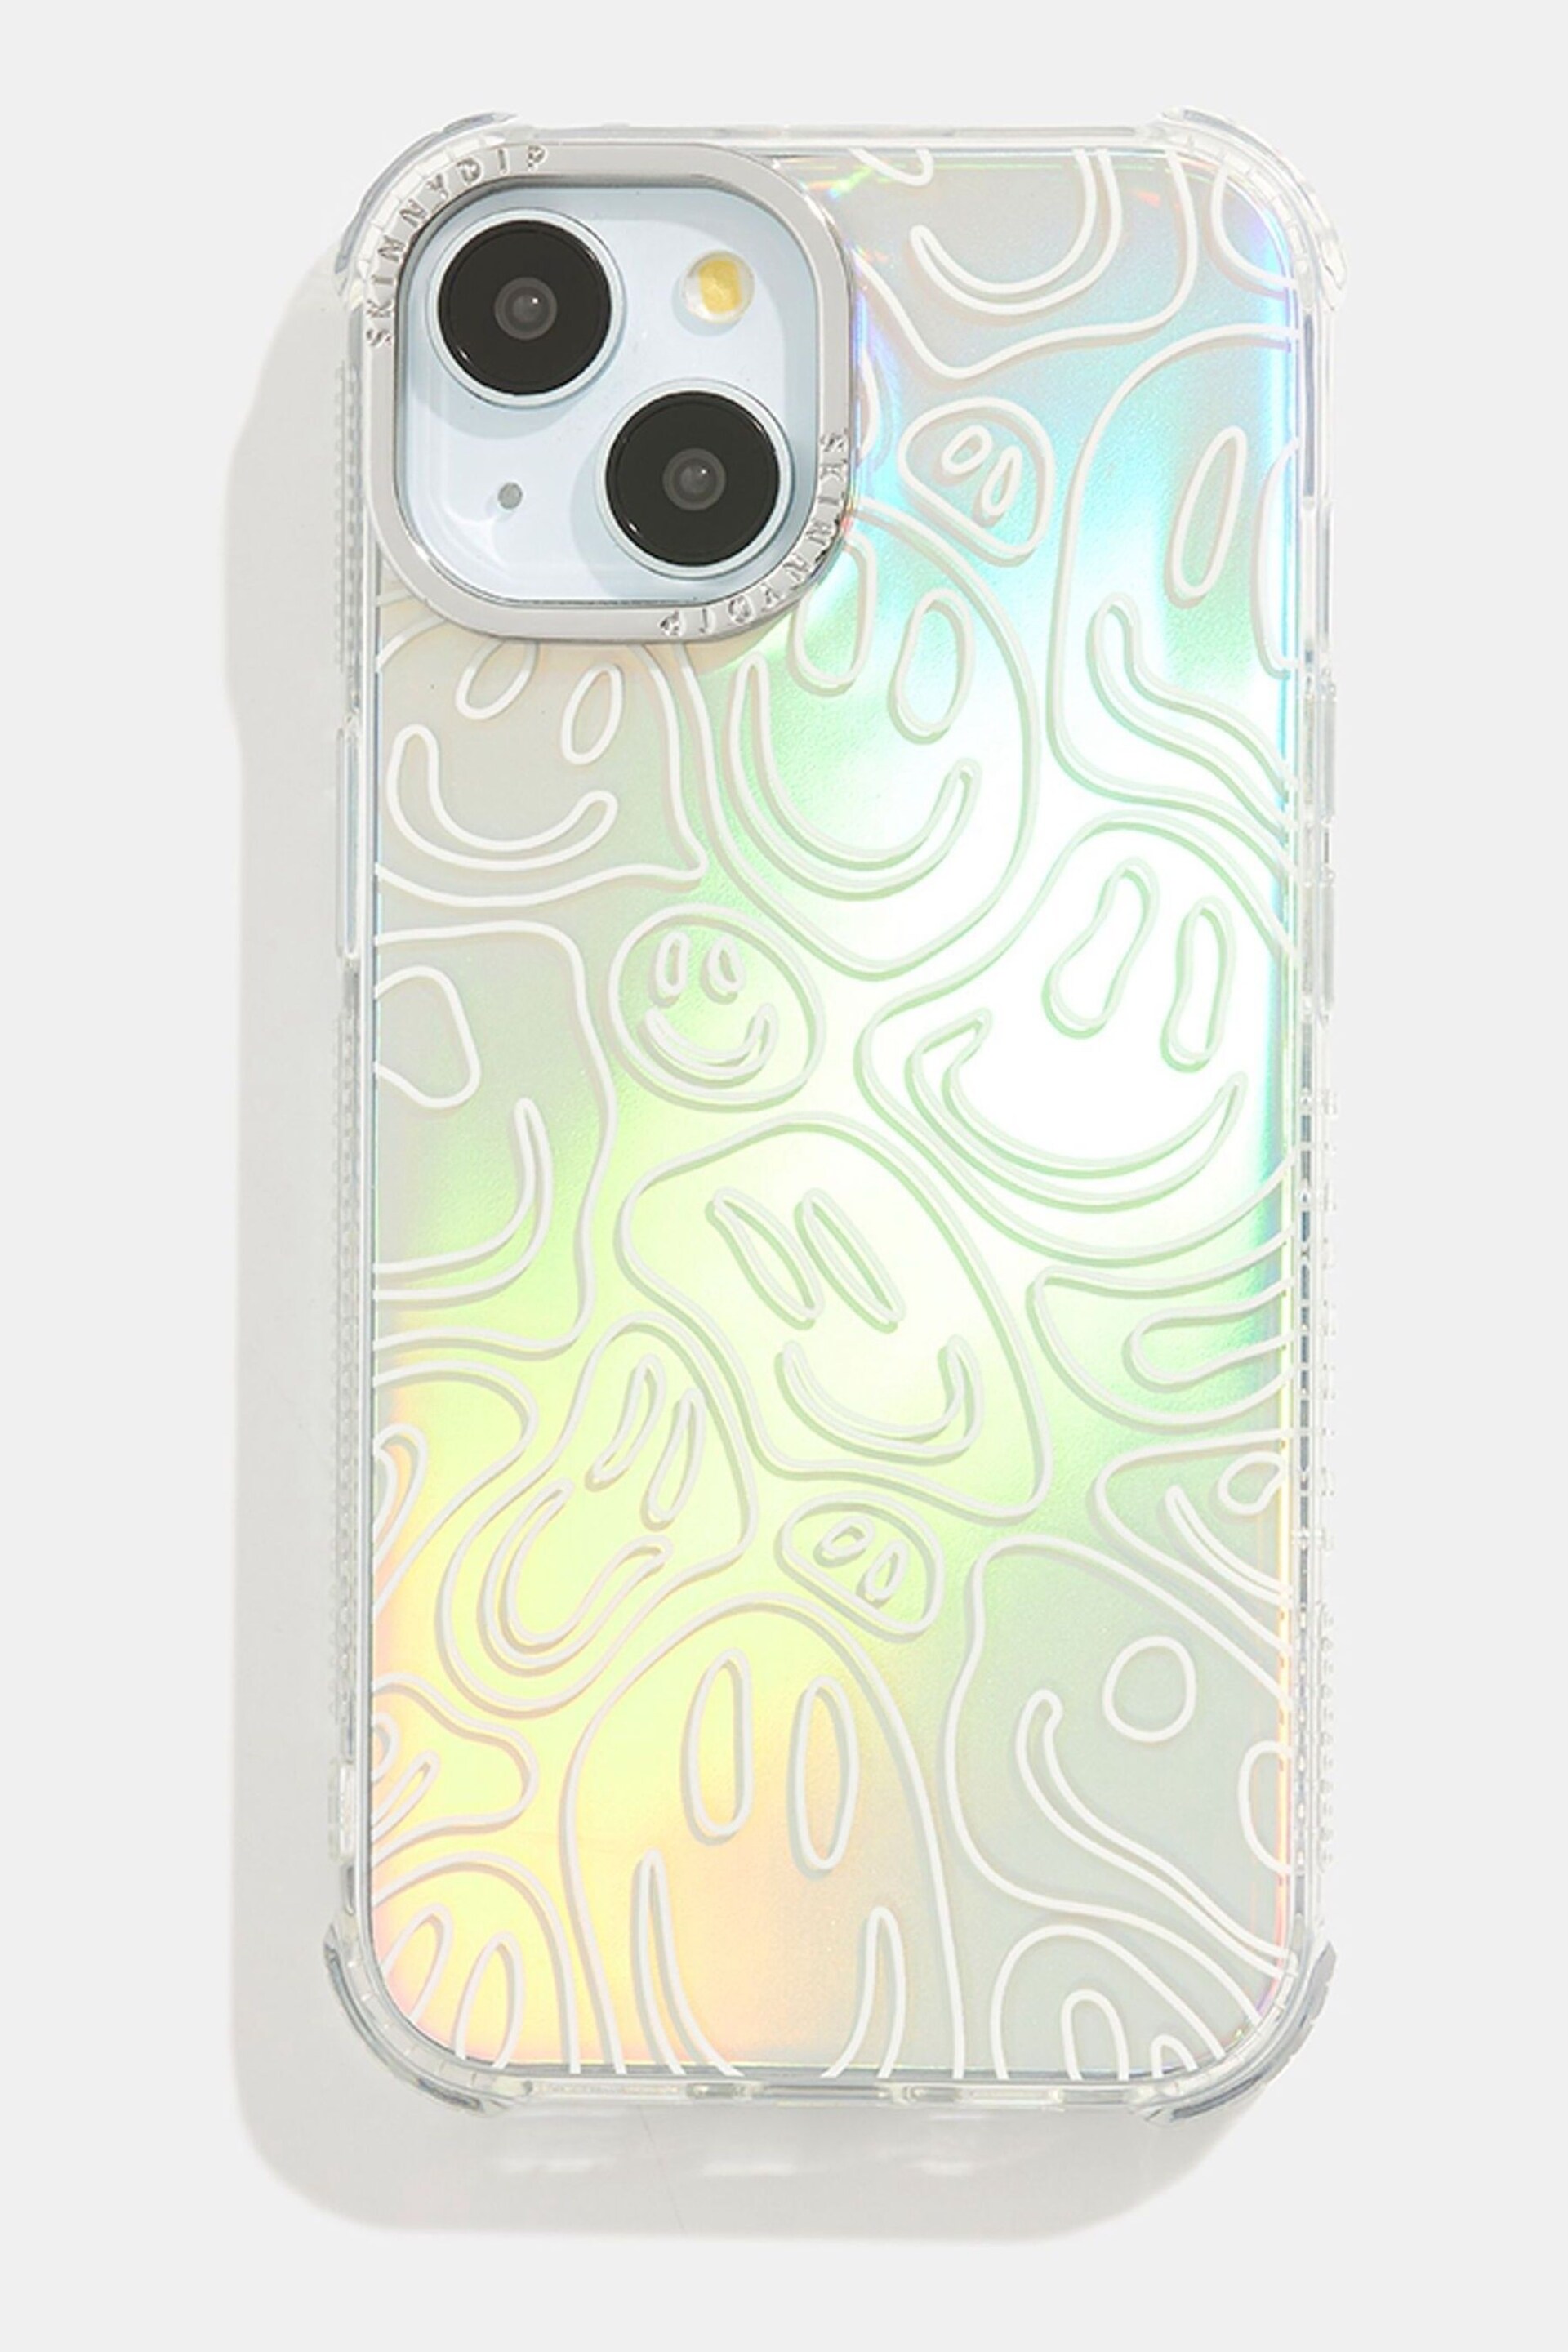 Skinnydip Silver Holo Warped Happy Face - Image 1 of 4